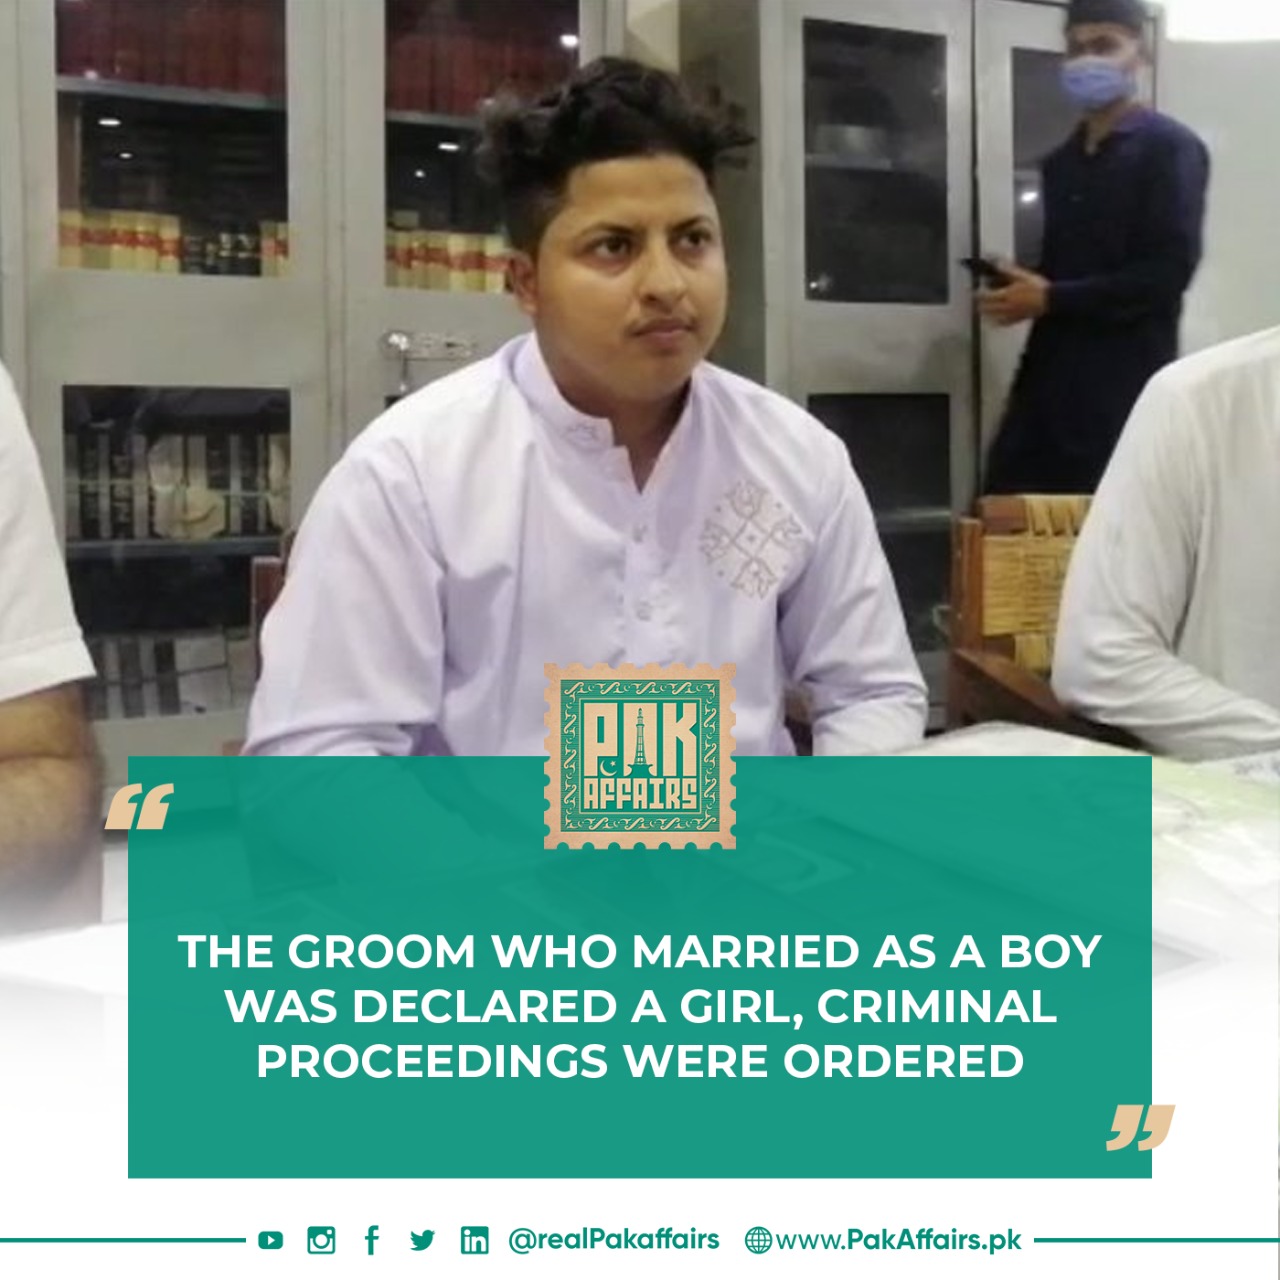 The groom who married as a boy was declared a girl, criminal proceedings were ordered.